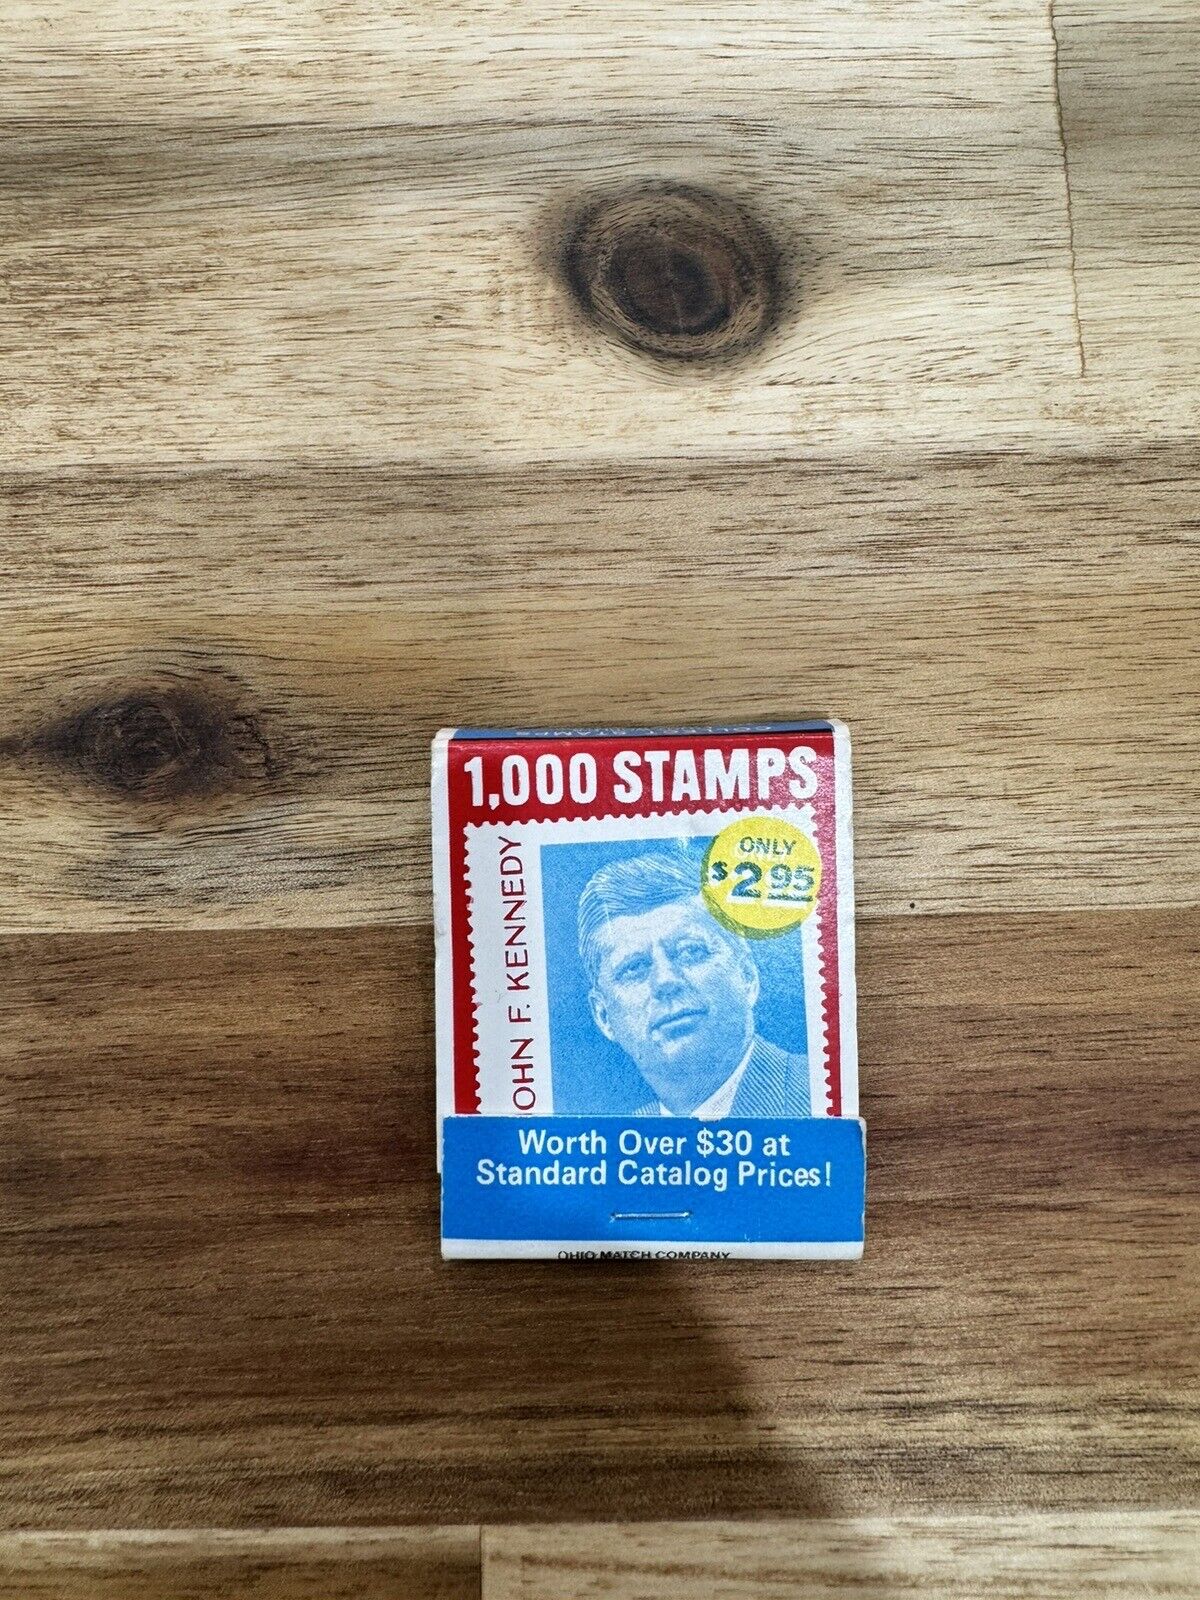 1000 Stamps Strike Matchbook Cover $2.95 John F Kennedy 17 Unstruck Matches